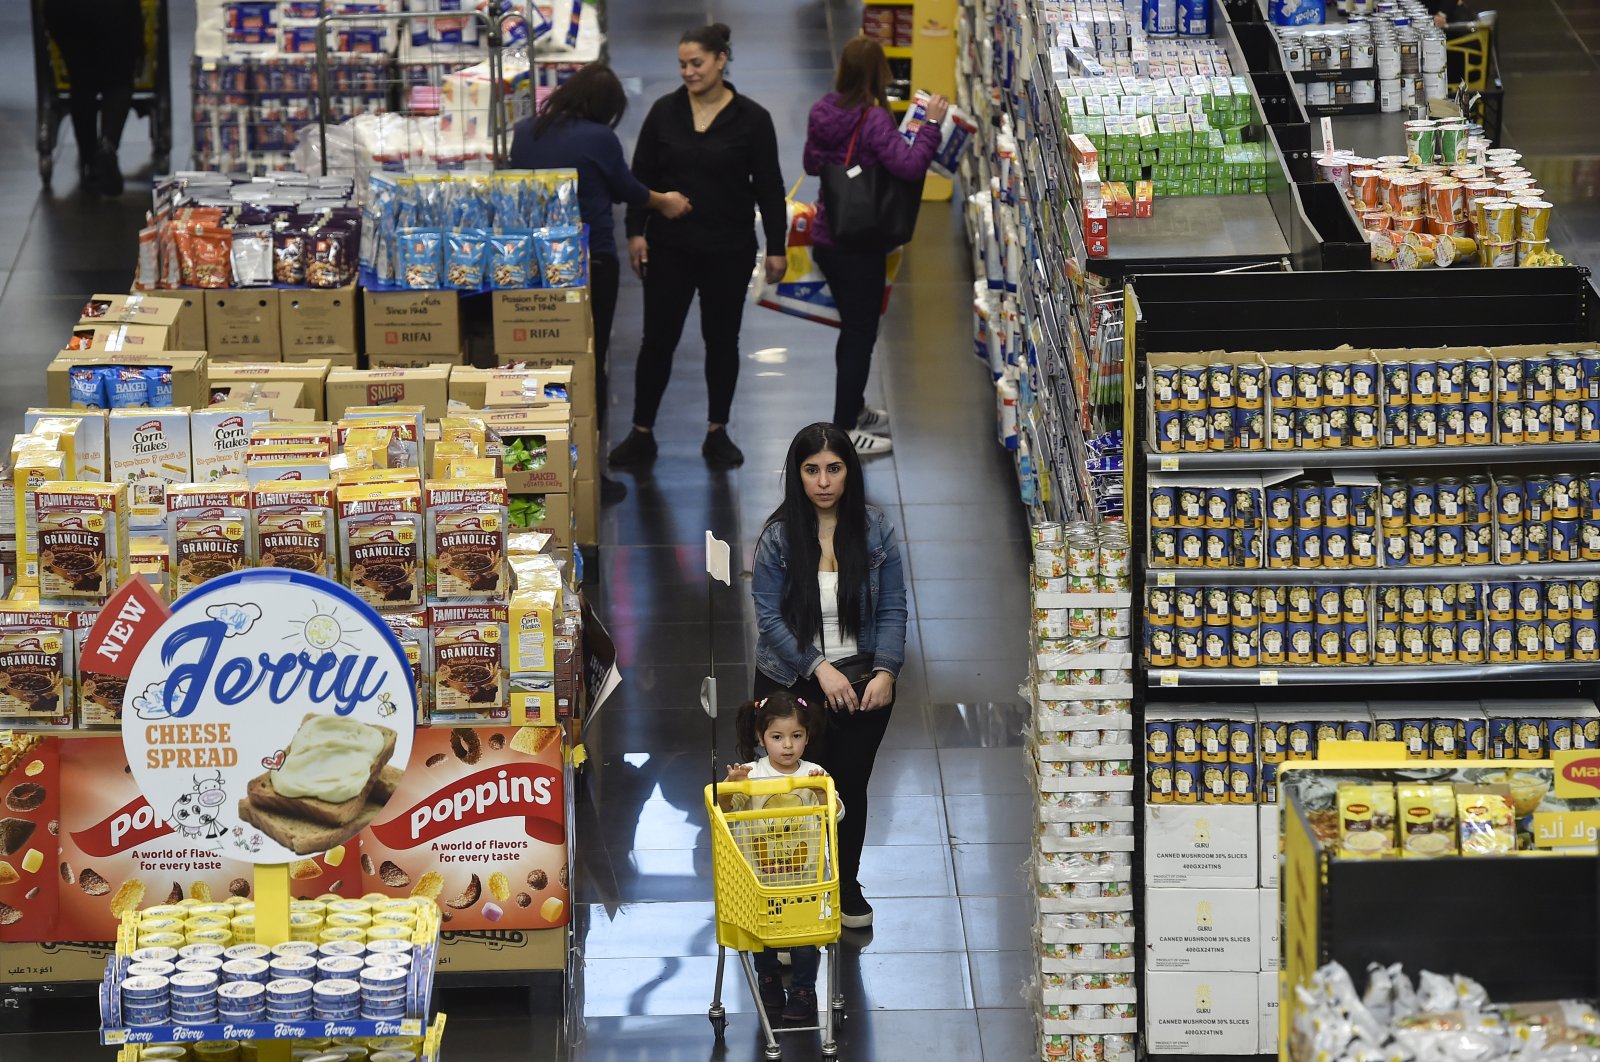 People shop at a supermarket as the prices of goods are declared in U.S. dollars, in Beirut, Lebanon March 1, 2023. (EPA Photo)